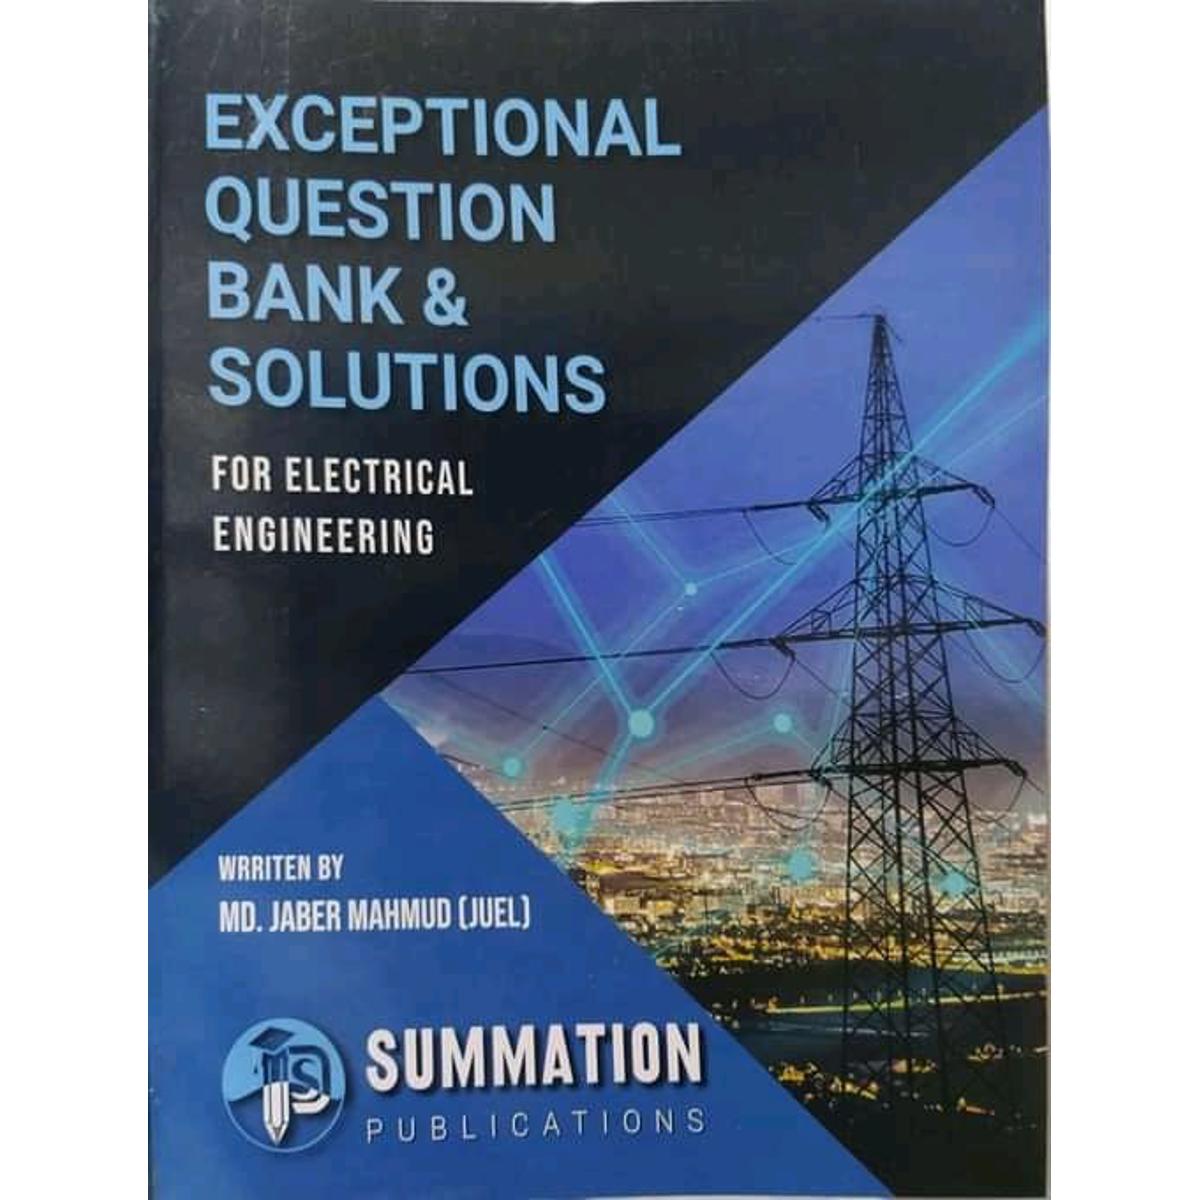 Exceptional Question Bank & Solutions for EEE by Jaber Mahmud (juel)